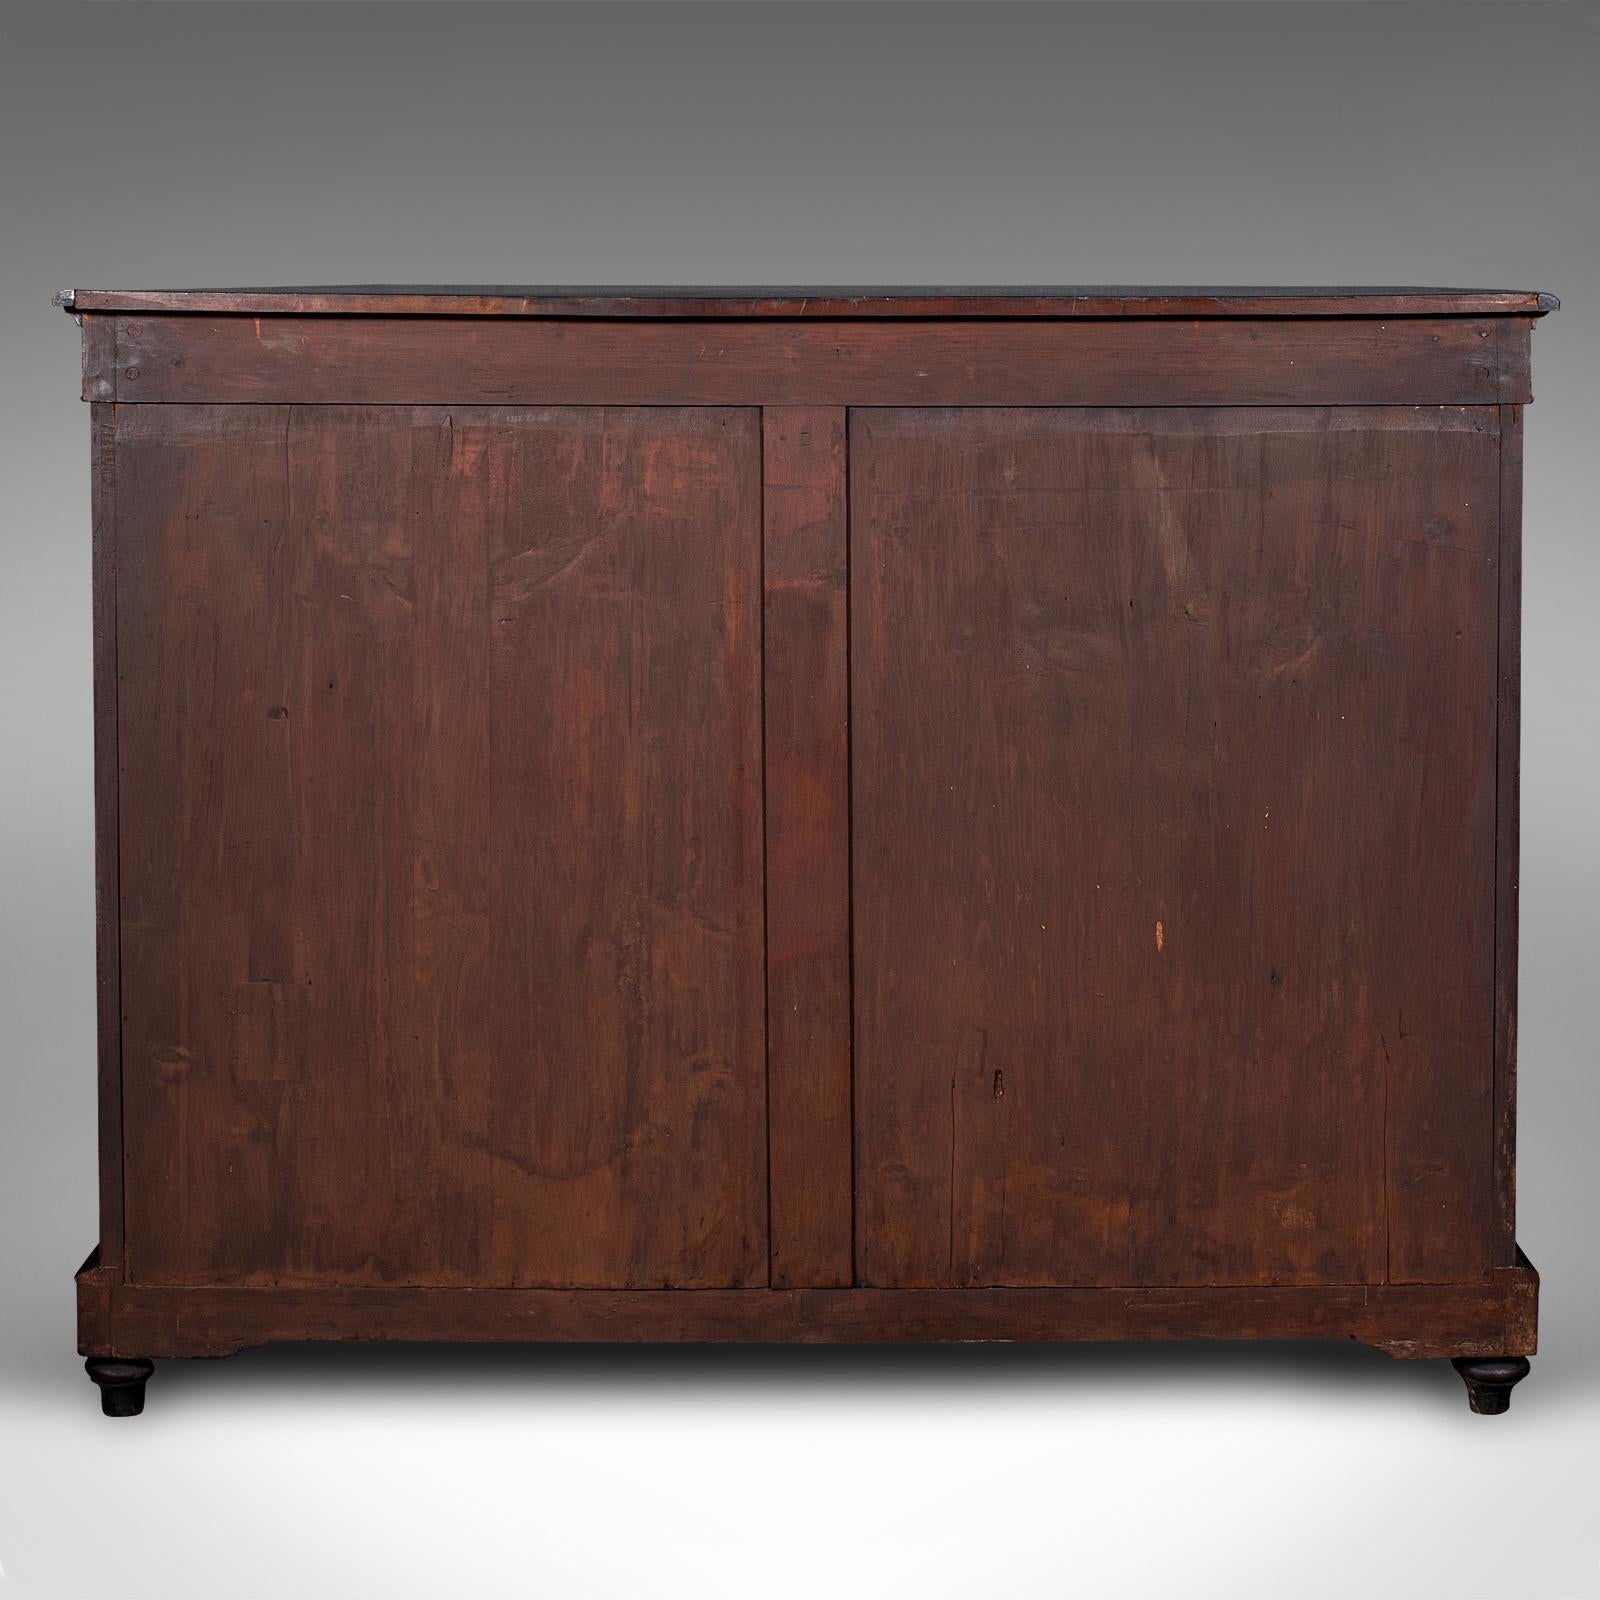 19th Century Antique Drawing Room Credenza, English, Walnut, Display Cabinet, Victorian, 1850 For Sale